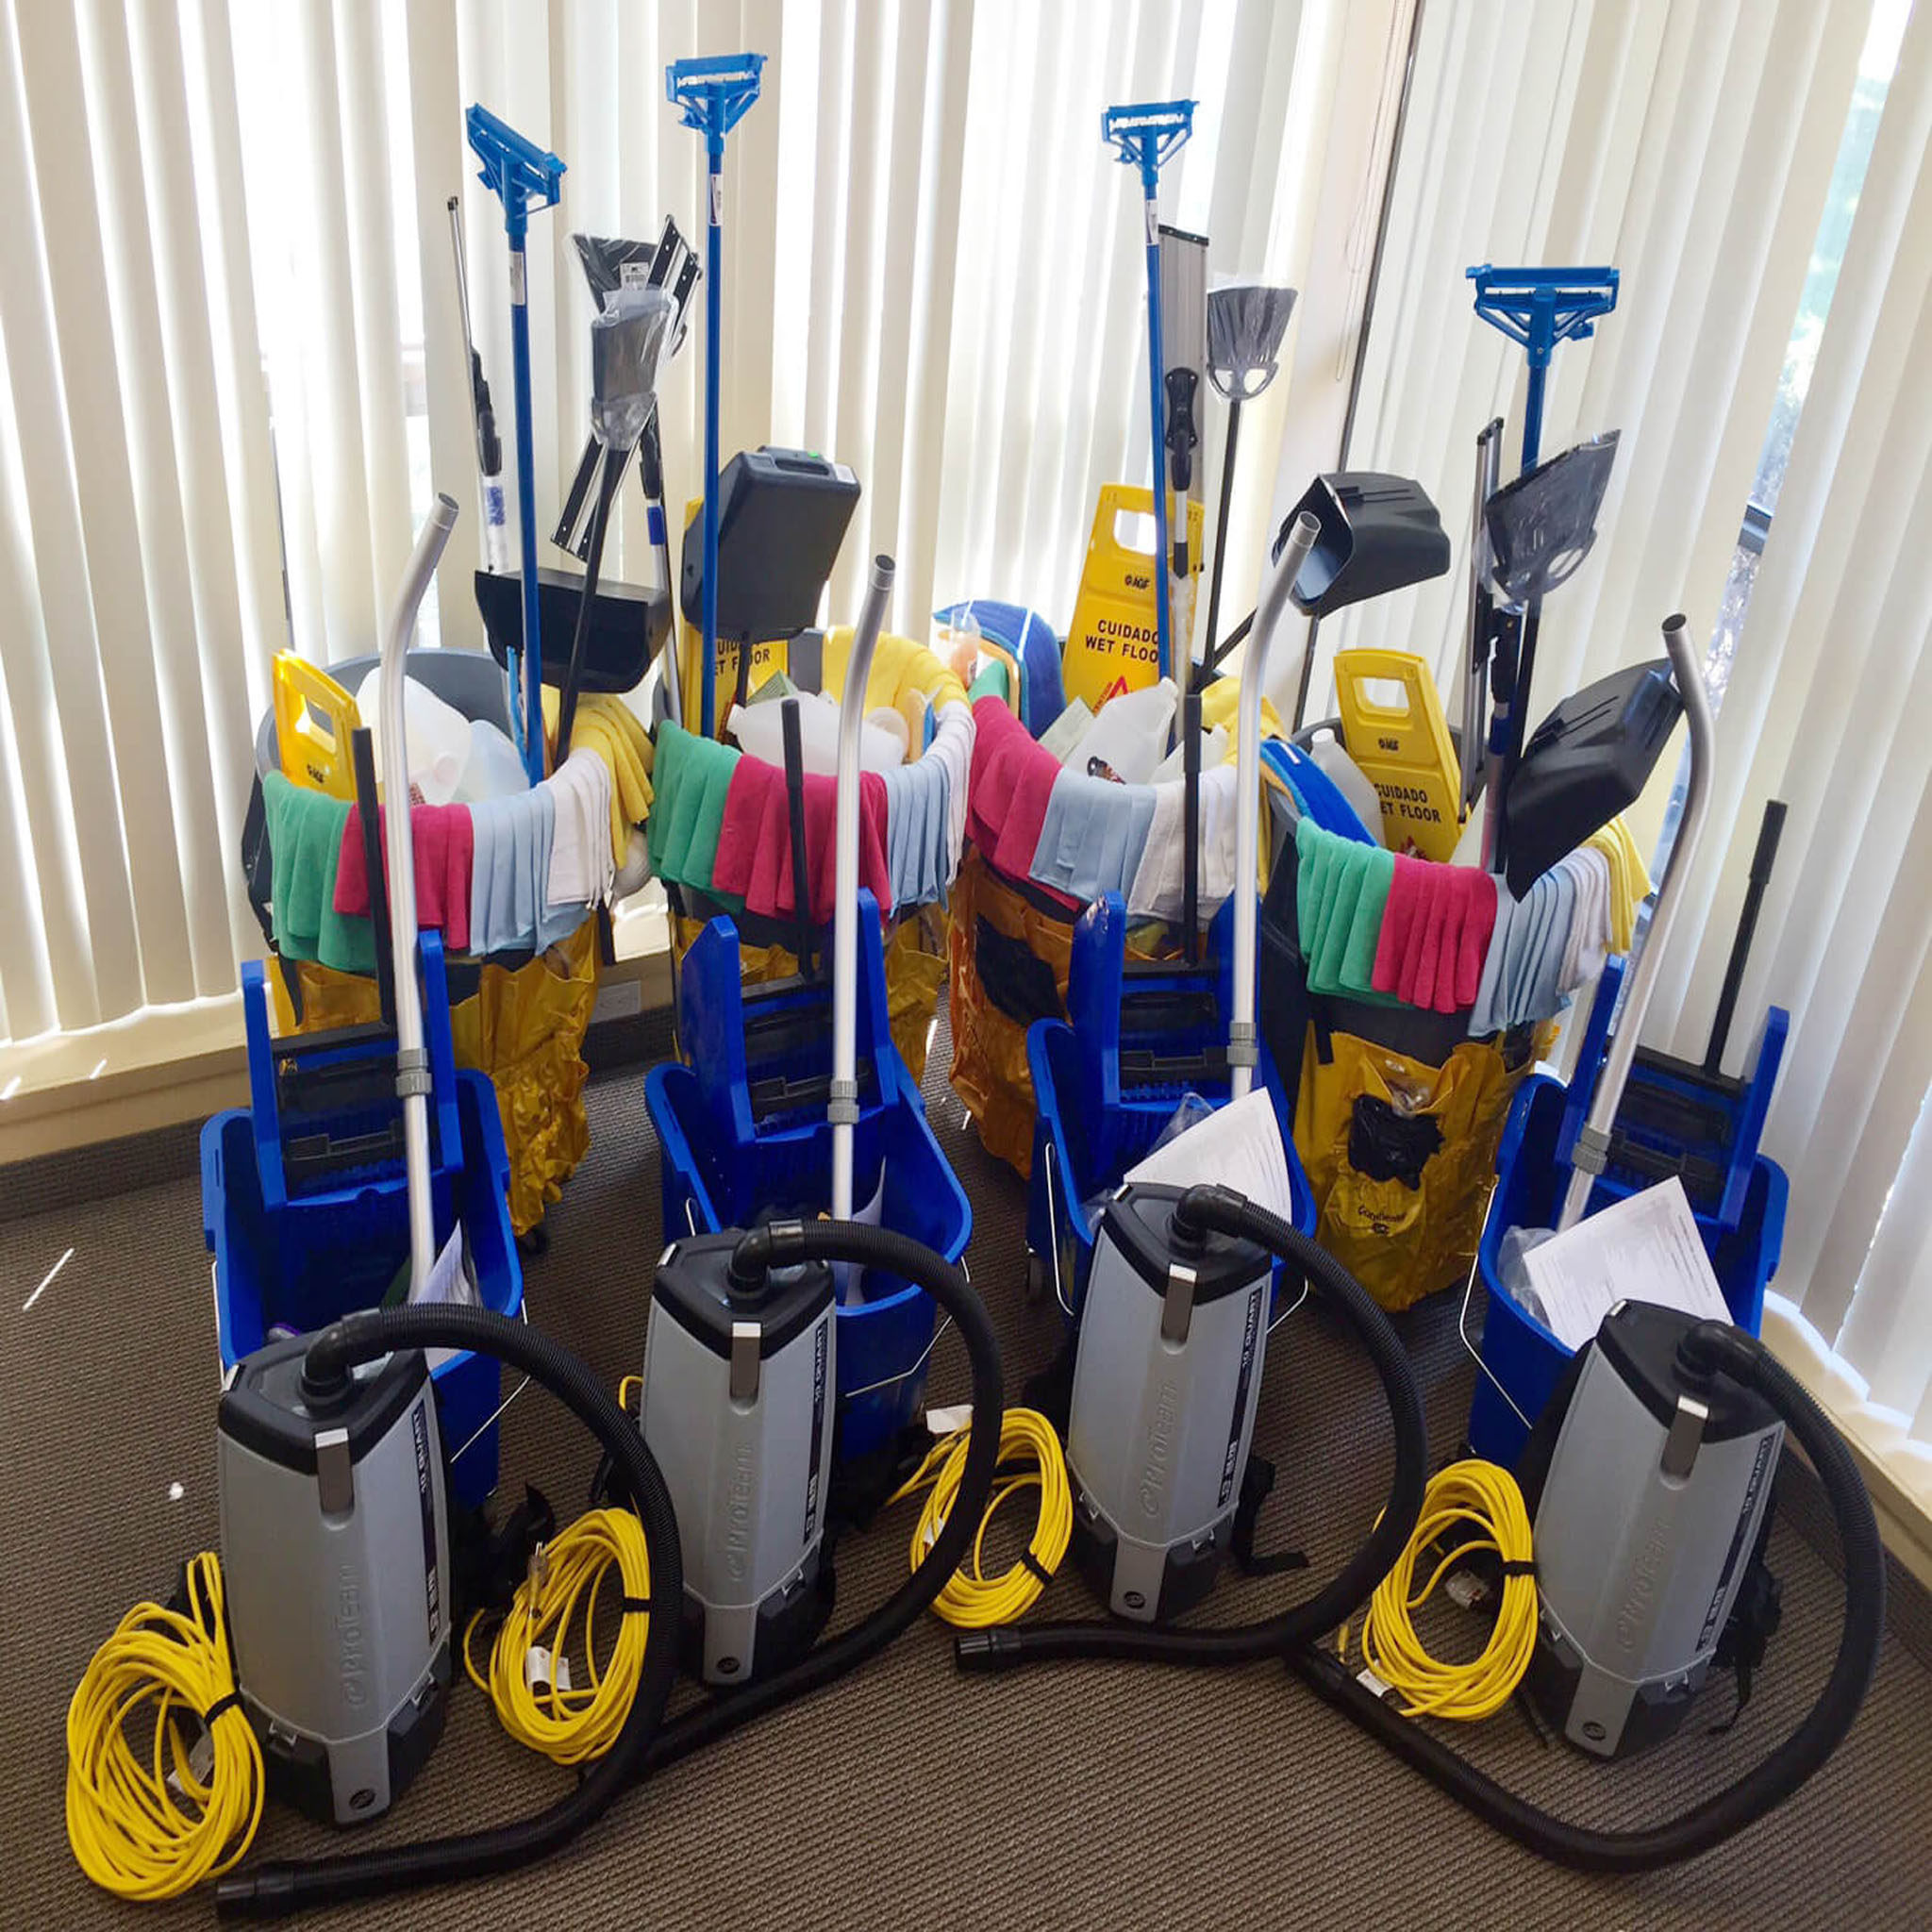 🚀🧼 Ready for a clean space lift-off? Emerald Management Services Cleaning Services is here to make it happen! #SparklingSpaces #DirtFreeCleaning #CleaningExperts 💧🏠 Schedule your clean-up at emeraldms.org/emeraldms.org or text us at +1 (548) 468 0345. 📲💻